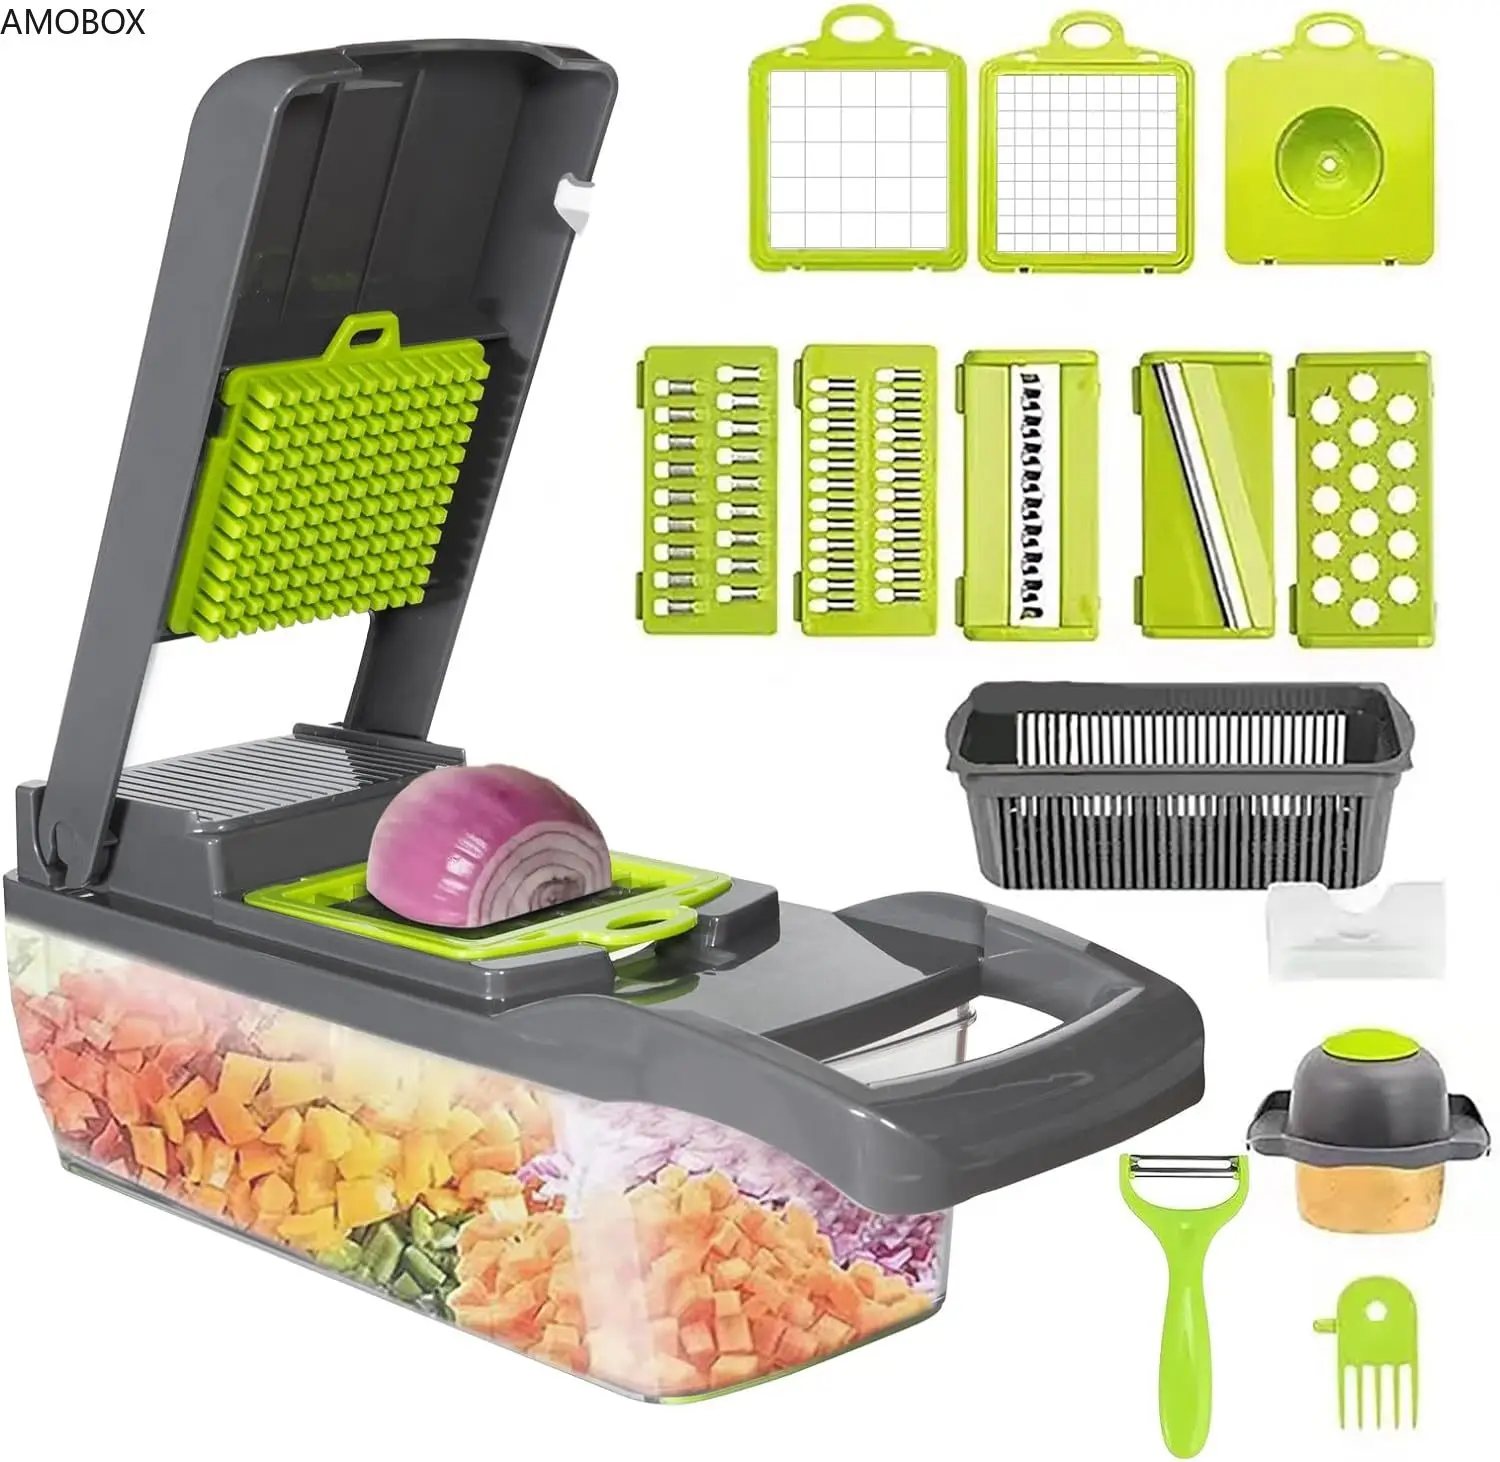 

AMOBOX-Vegetable Chopper Cutter, Slicer, Multifunctional, Food, Veggie, Salad, Onion, Dicer with Container, 14 in 1